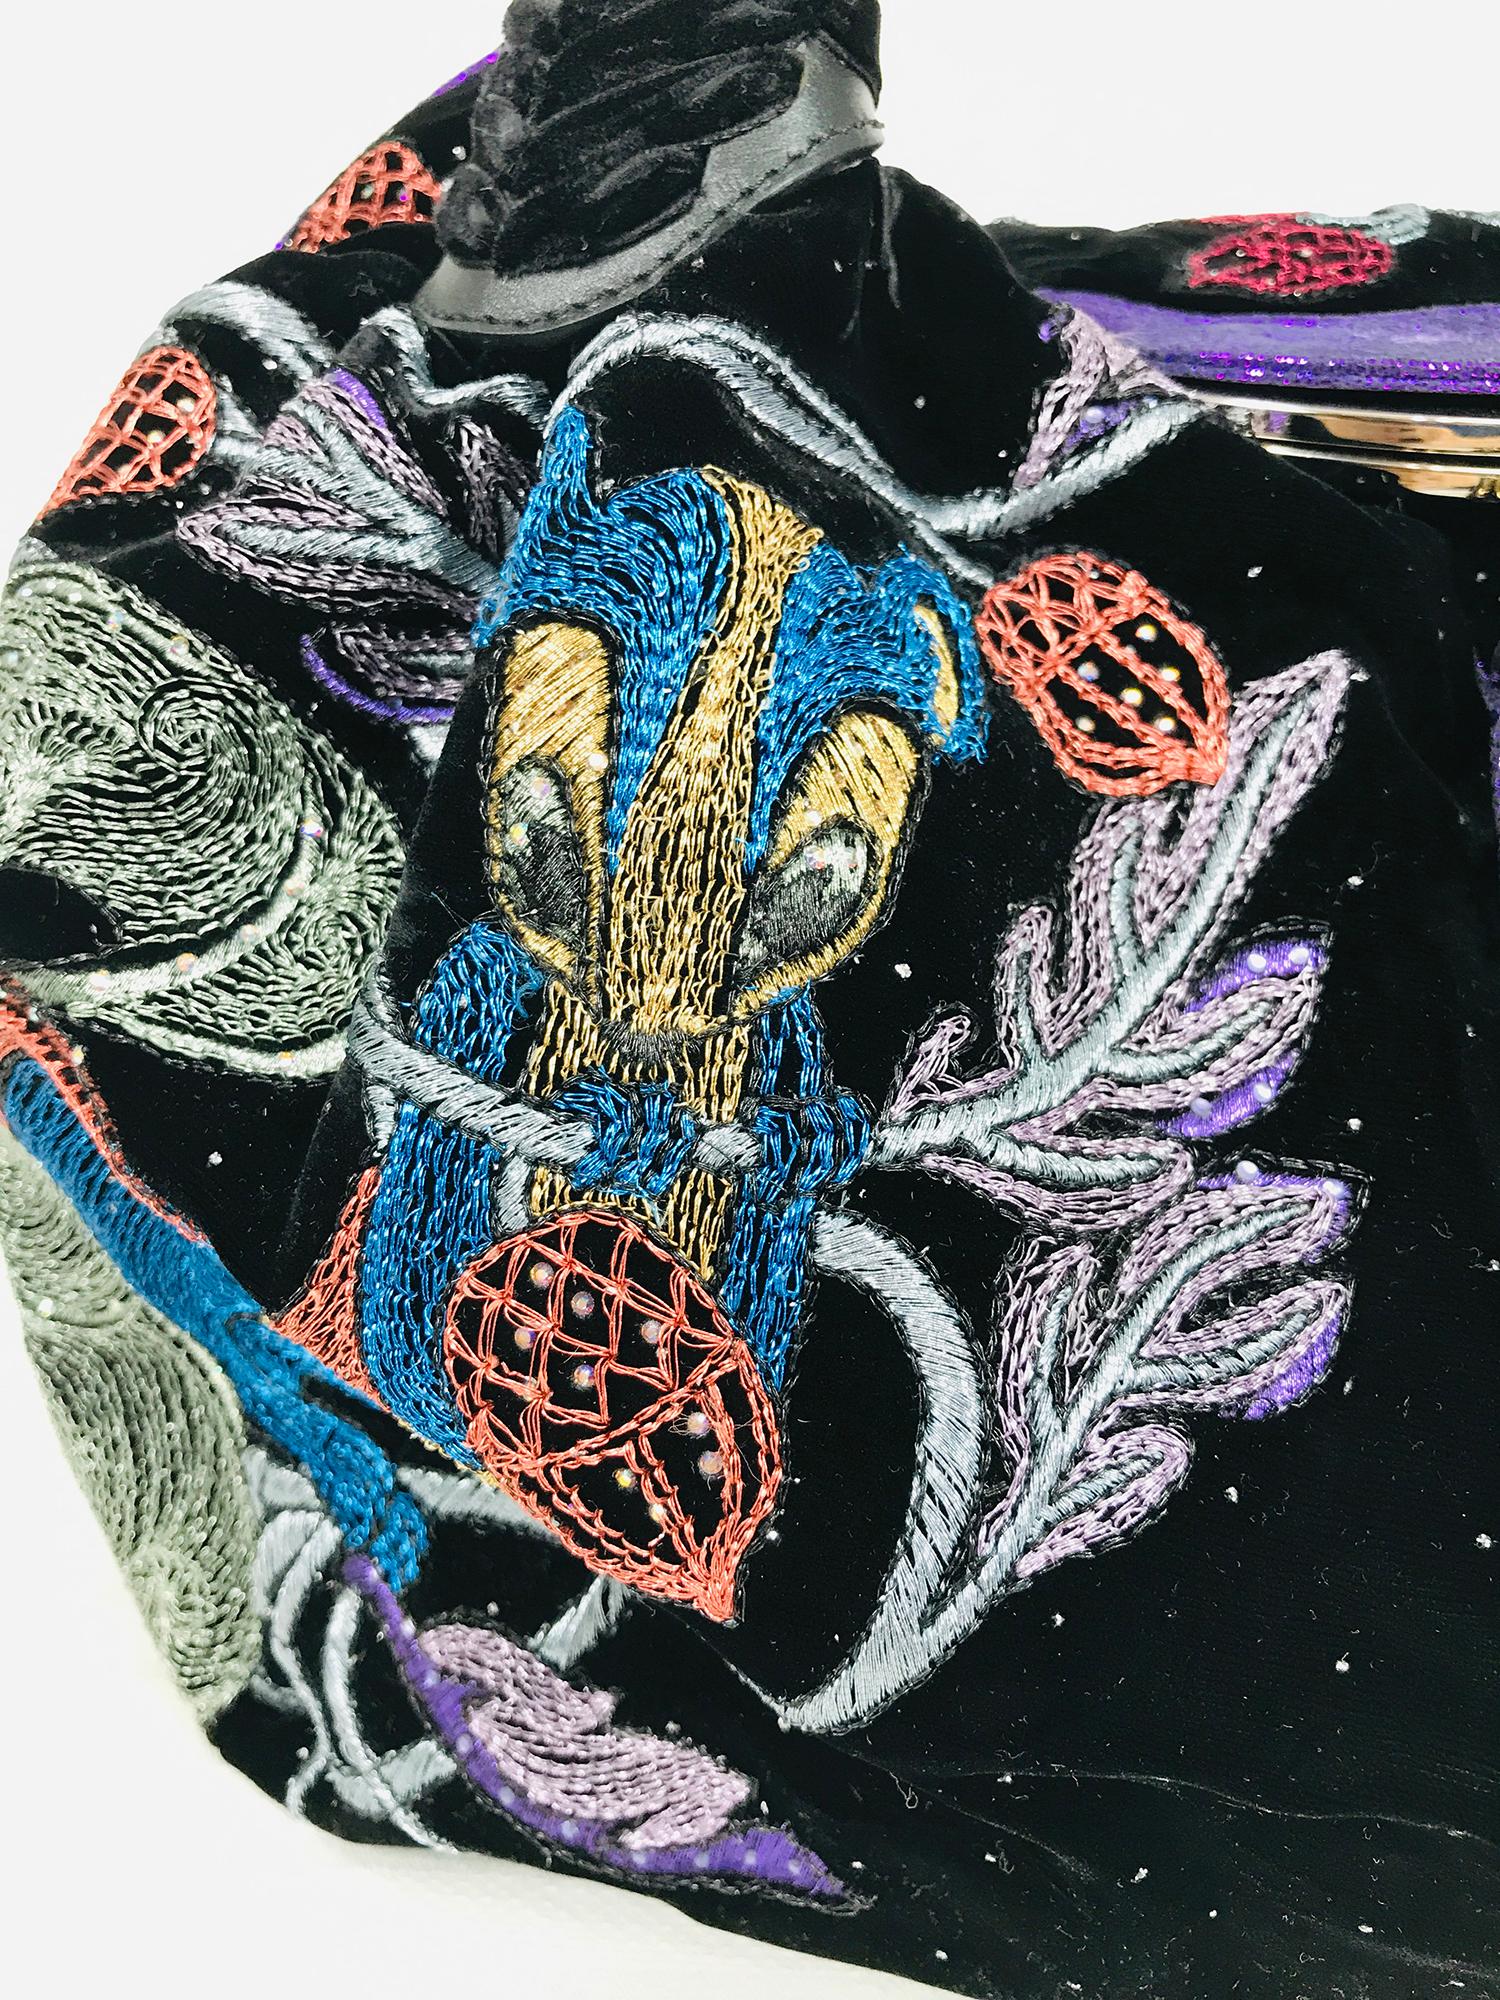 Fendi squirrel velvet purple sparkle suede metallic embroidered spy bag. Embroidered black velvet with silver metallic sparkle stars and metallic coloured embroidery which thread highlight the squirrels, flora & fauna. Iridescent sparkle purple